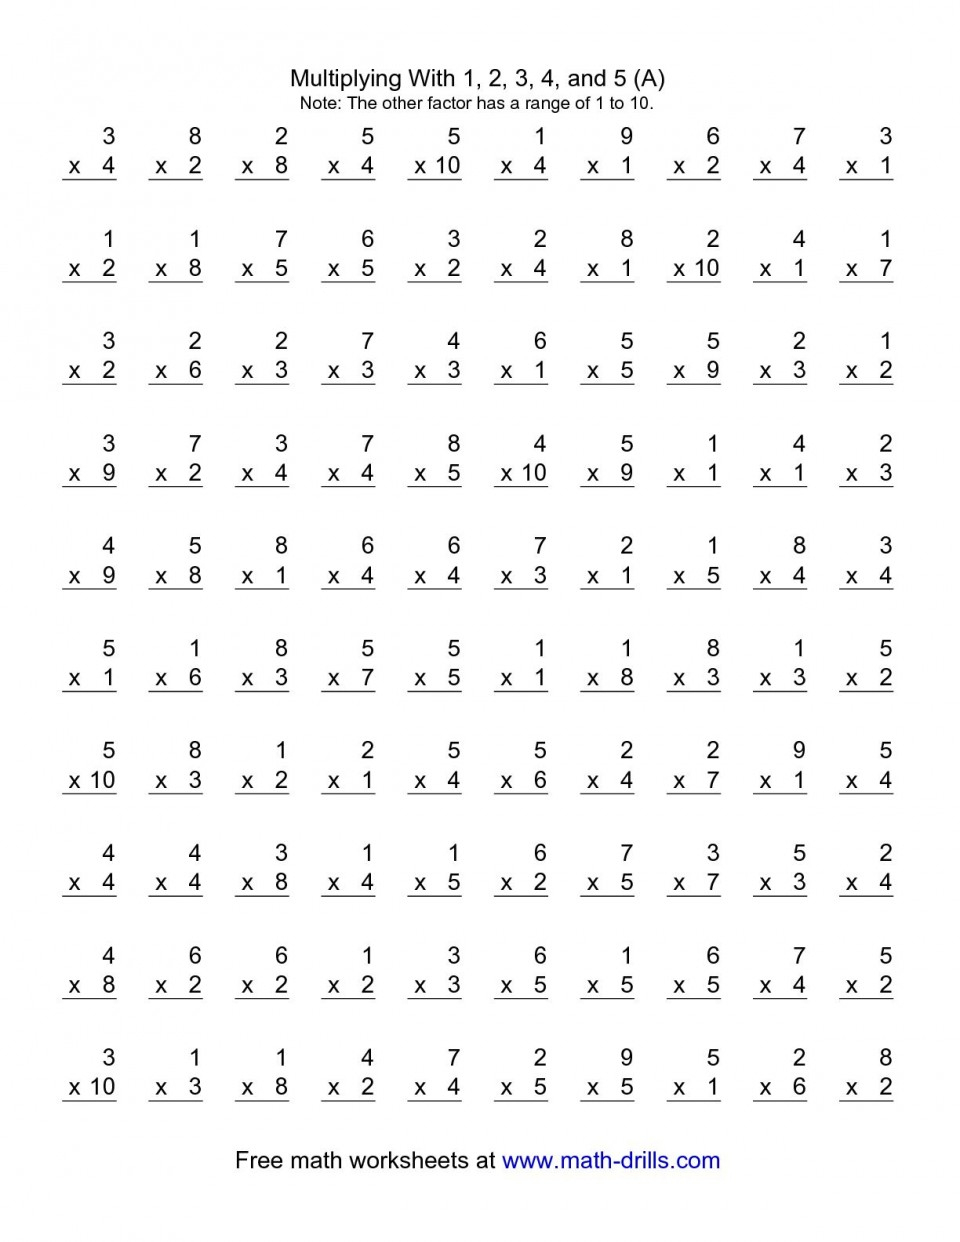 Multiplication Math Facts Worksheets Printable Breathtaking And - Free Printable Multiplication Worksheets 100 Problems